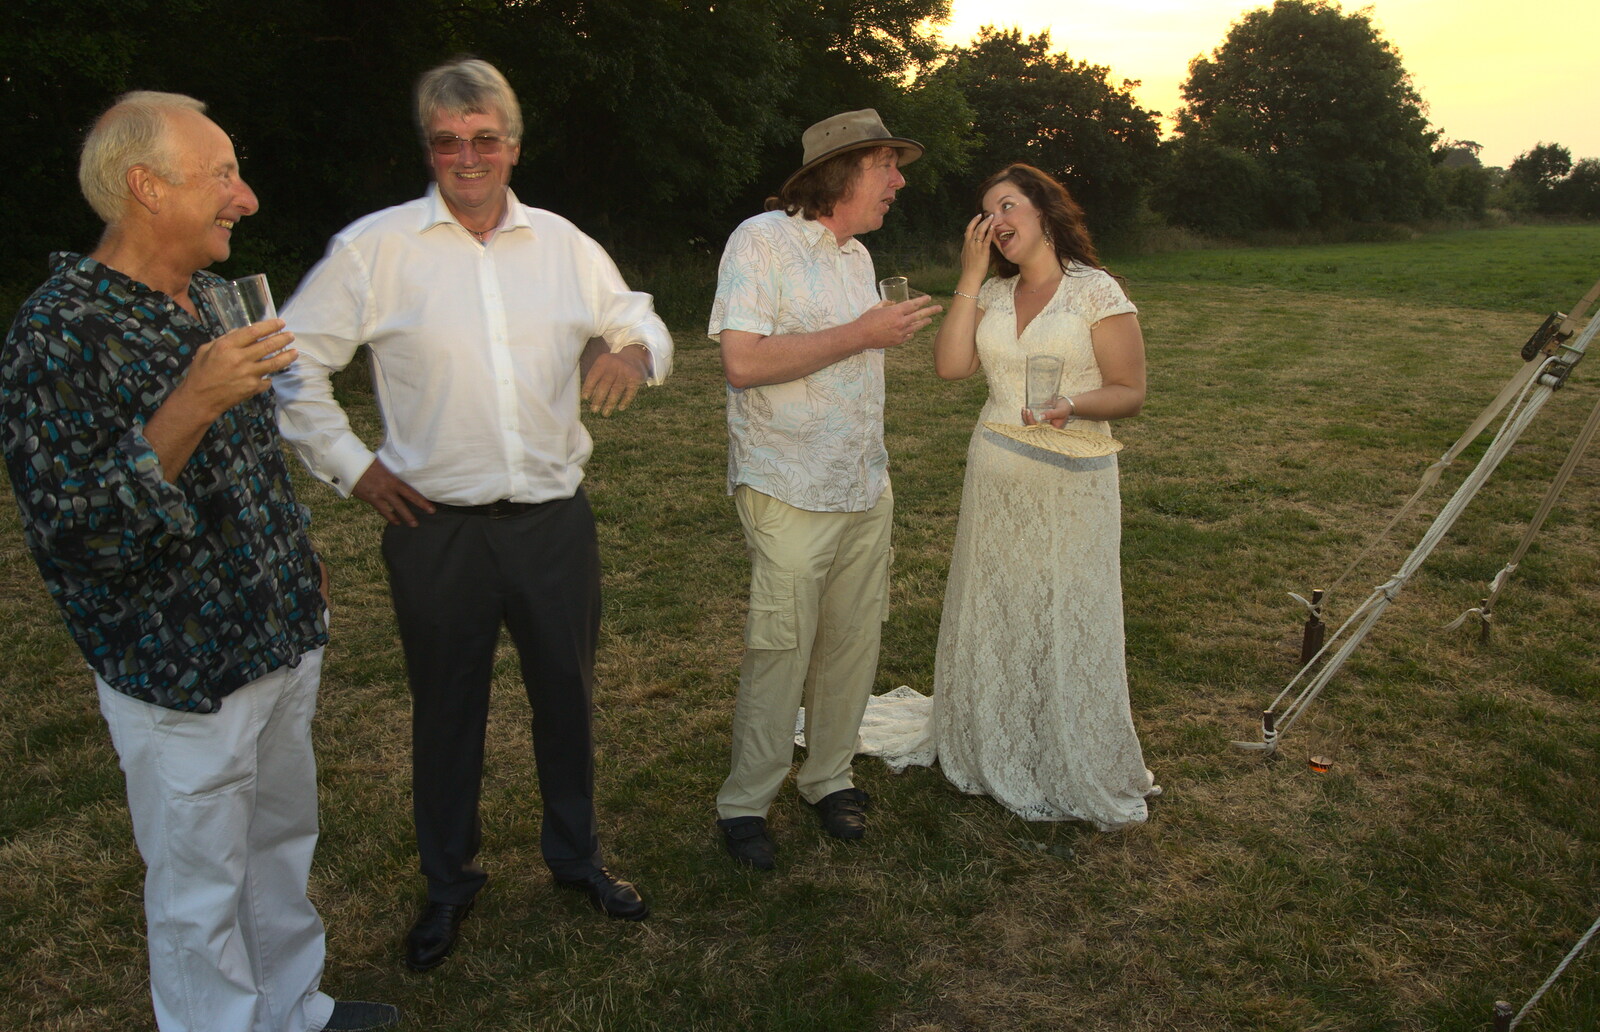 Henry, Martin, Max and Steph from The BBs Play Steph's Wedding, Burston, Norfolk - 13th July 2013